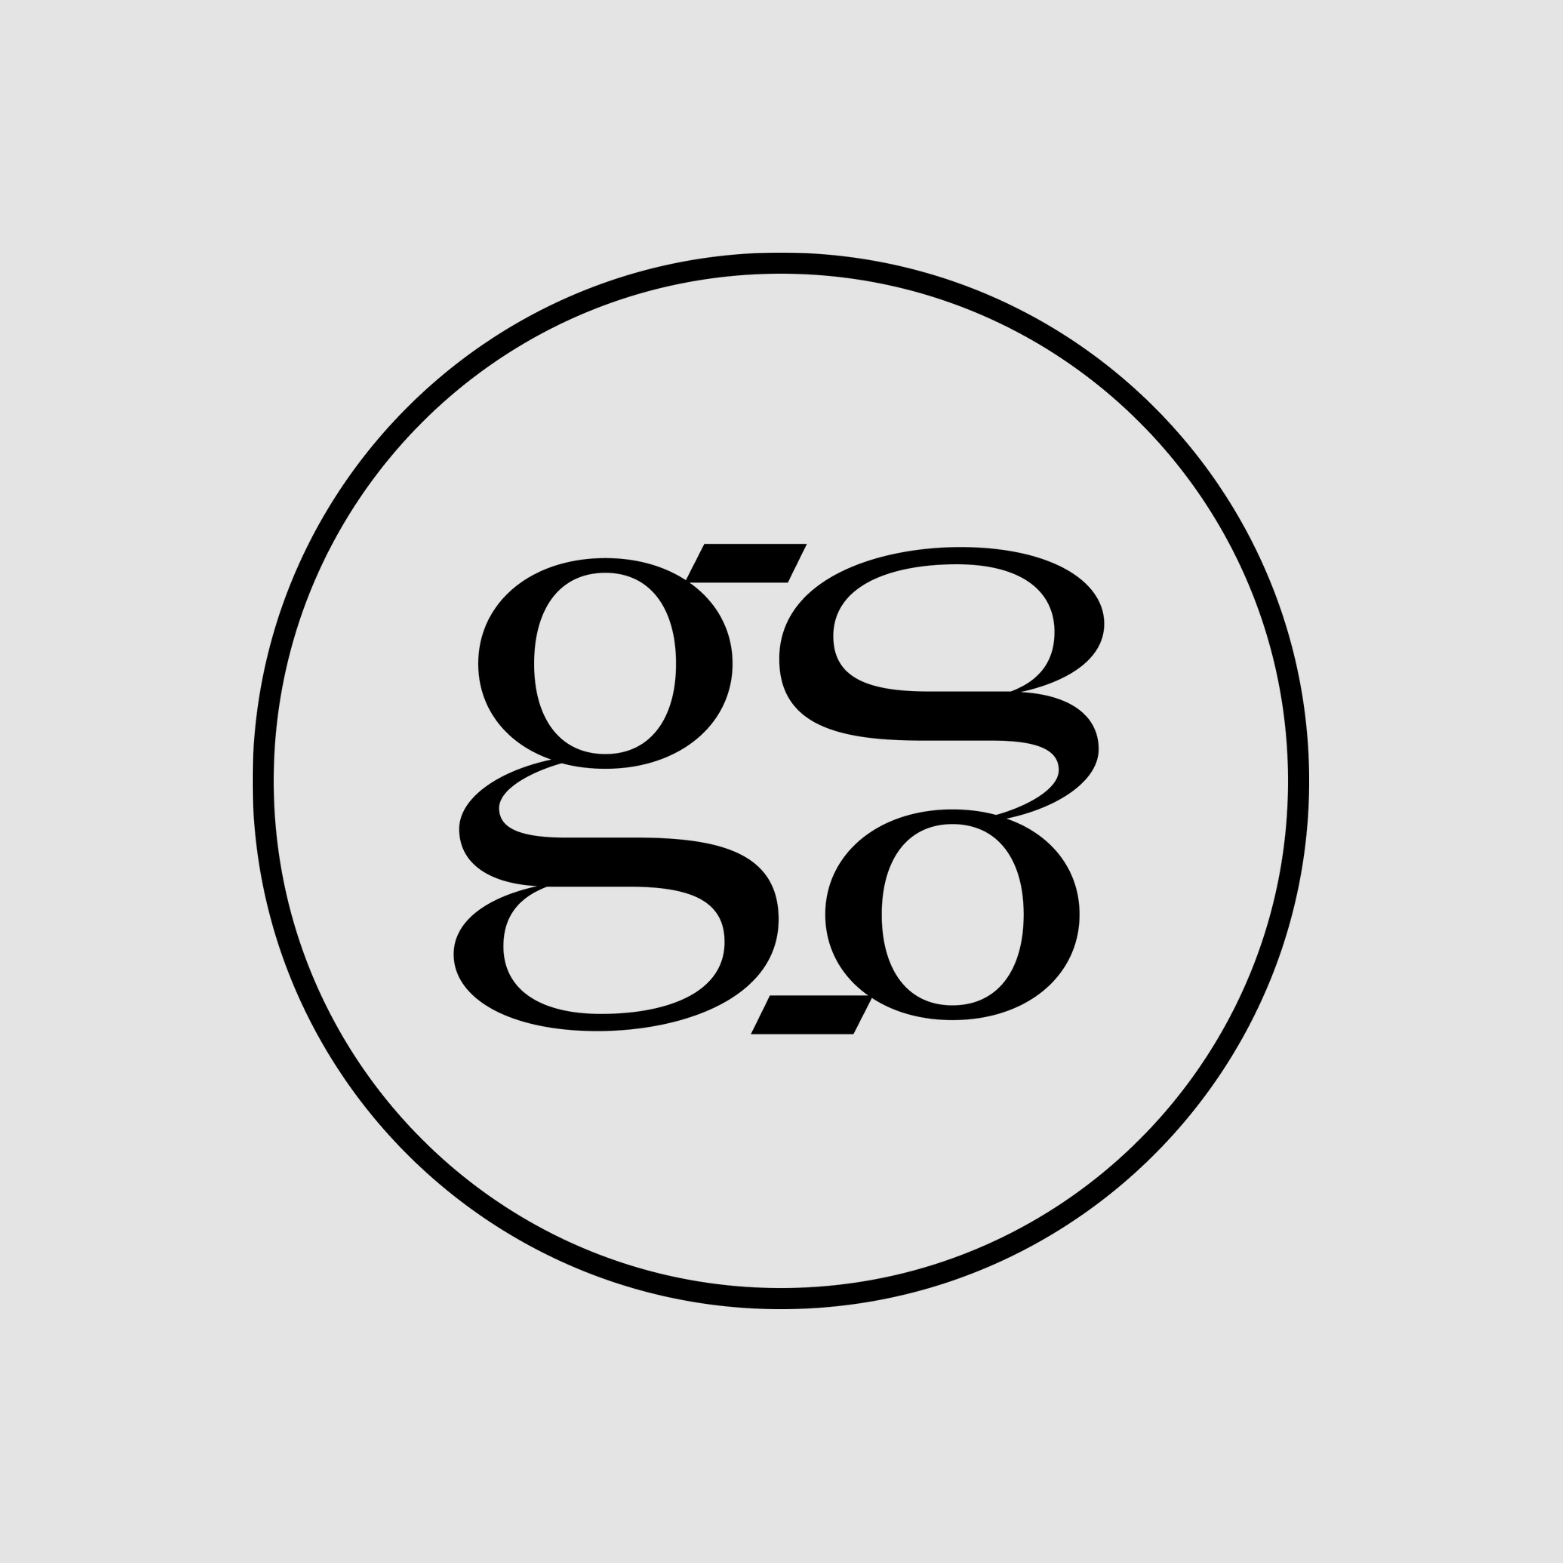 A black circular logo contains the letter pair "gg" in a modern, overlapping design against a light gray background.